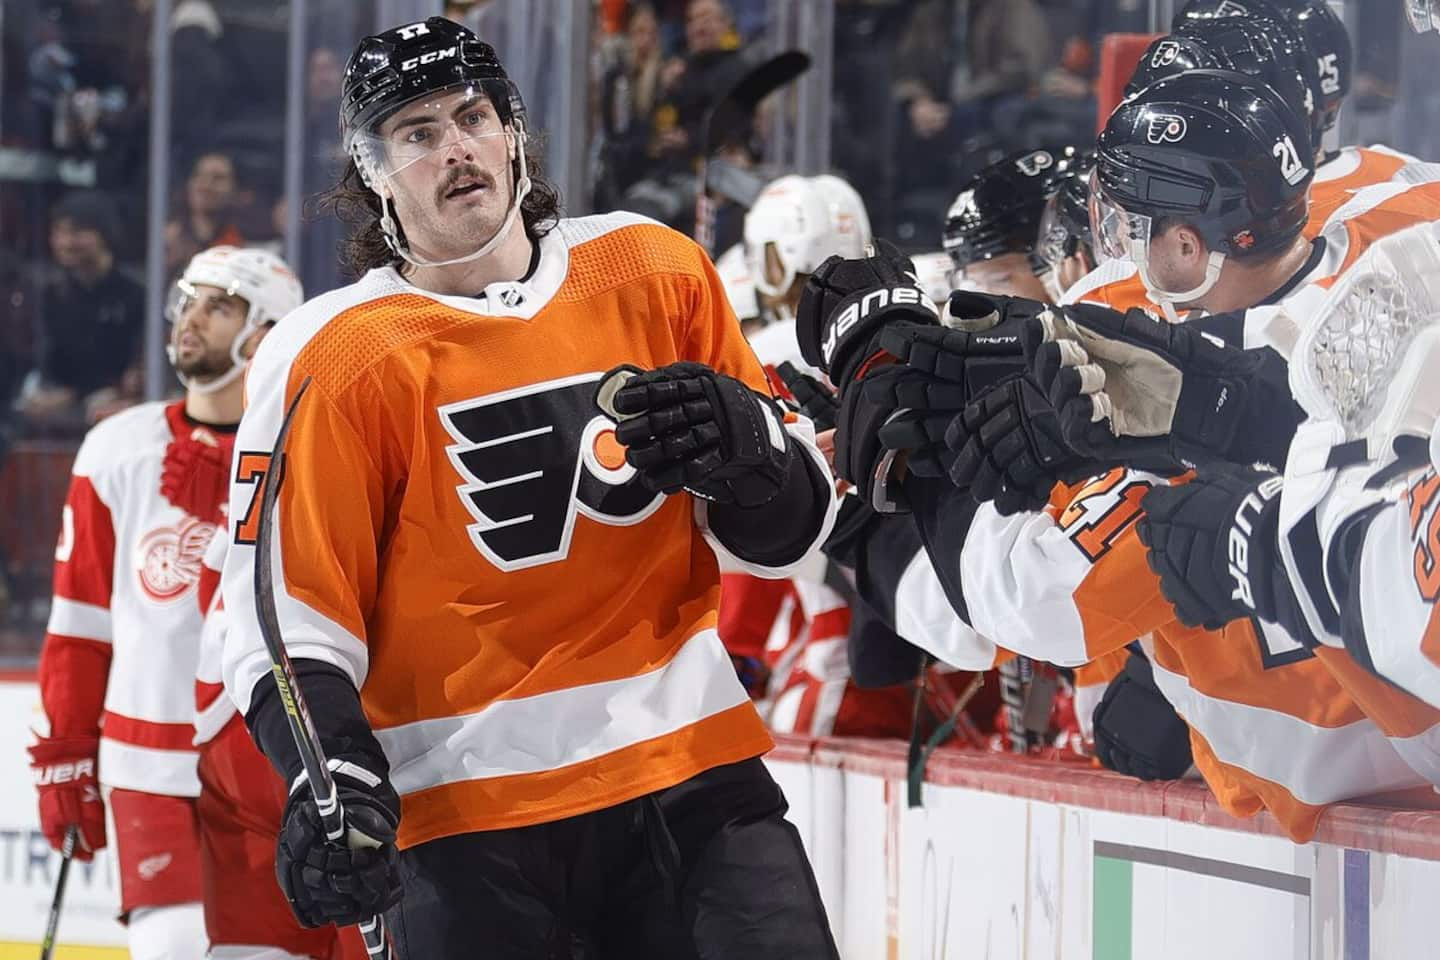 NHL: the "heart" of the Flyers remains in Philadelphia